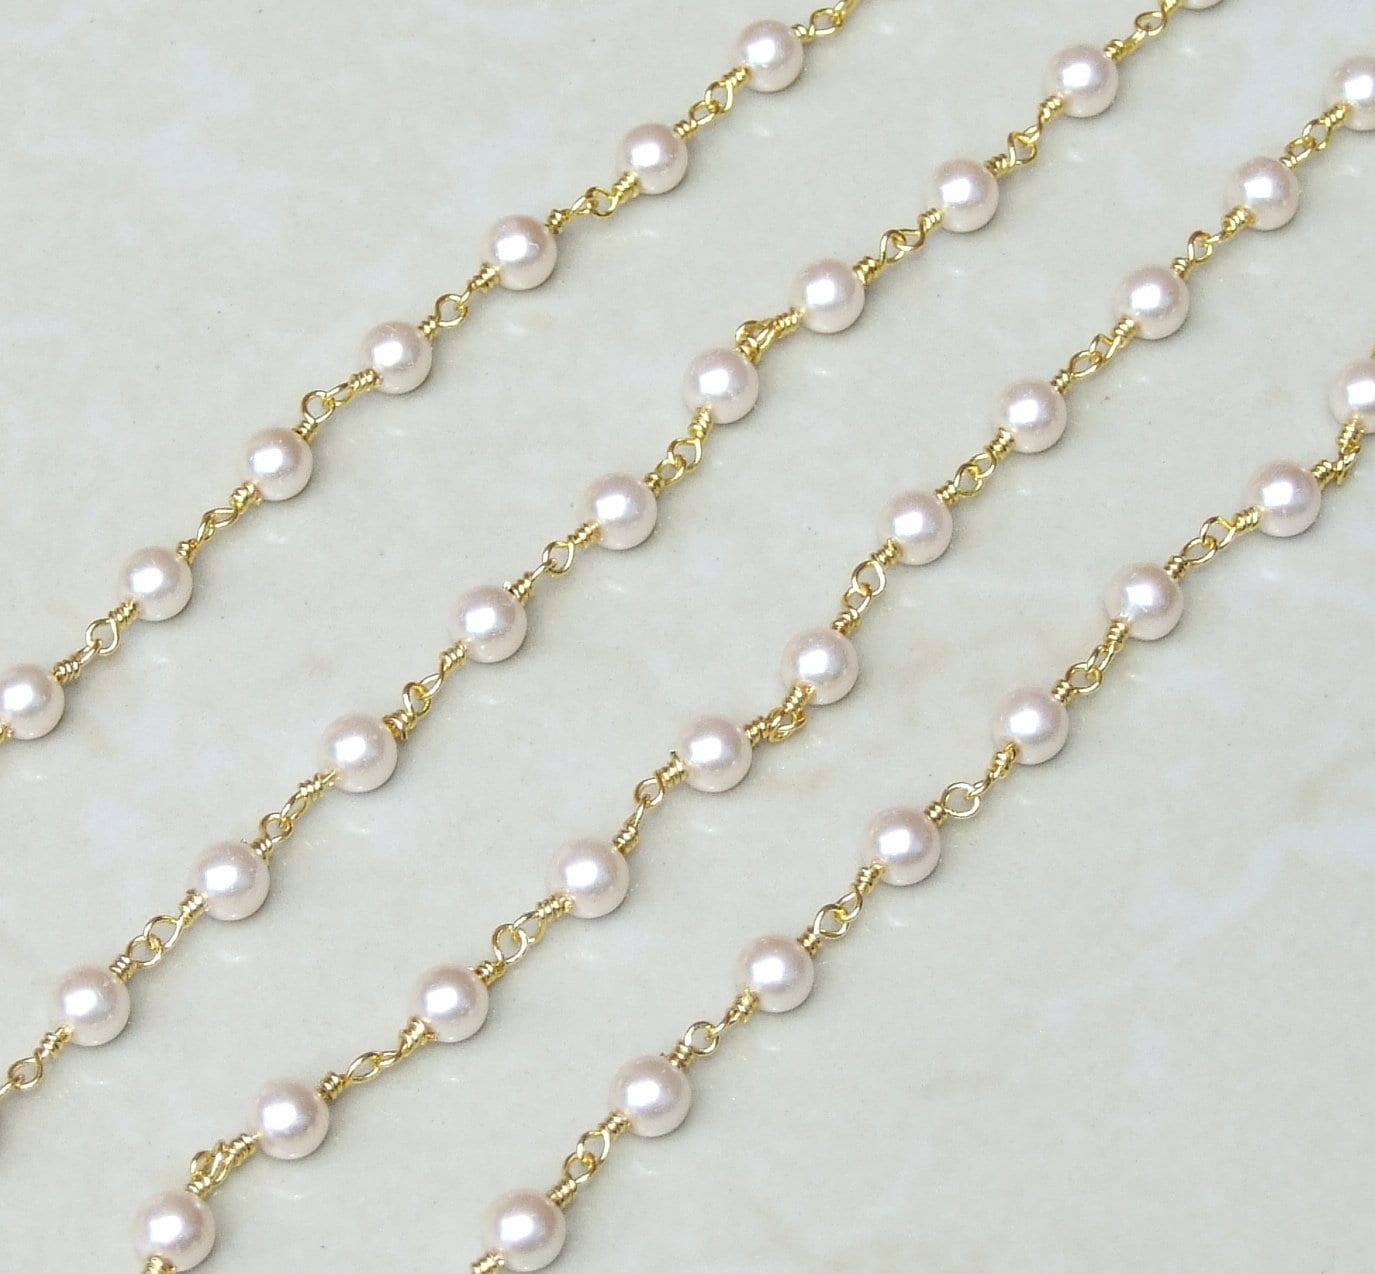 White Glass Pearl Rosary Chain, Bulk Chain, Rondelle Glass Beads, Beaded Chain, Body Chain Jewelry, Gold Chain, Necklace Chain, Belly Chain